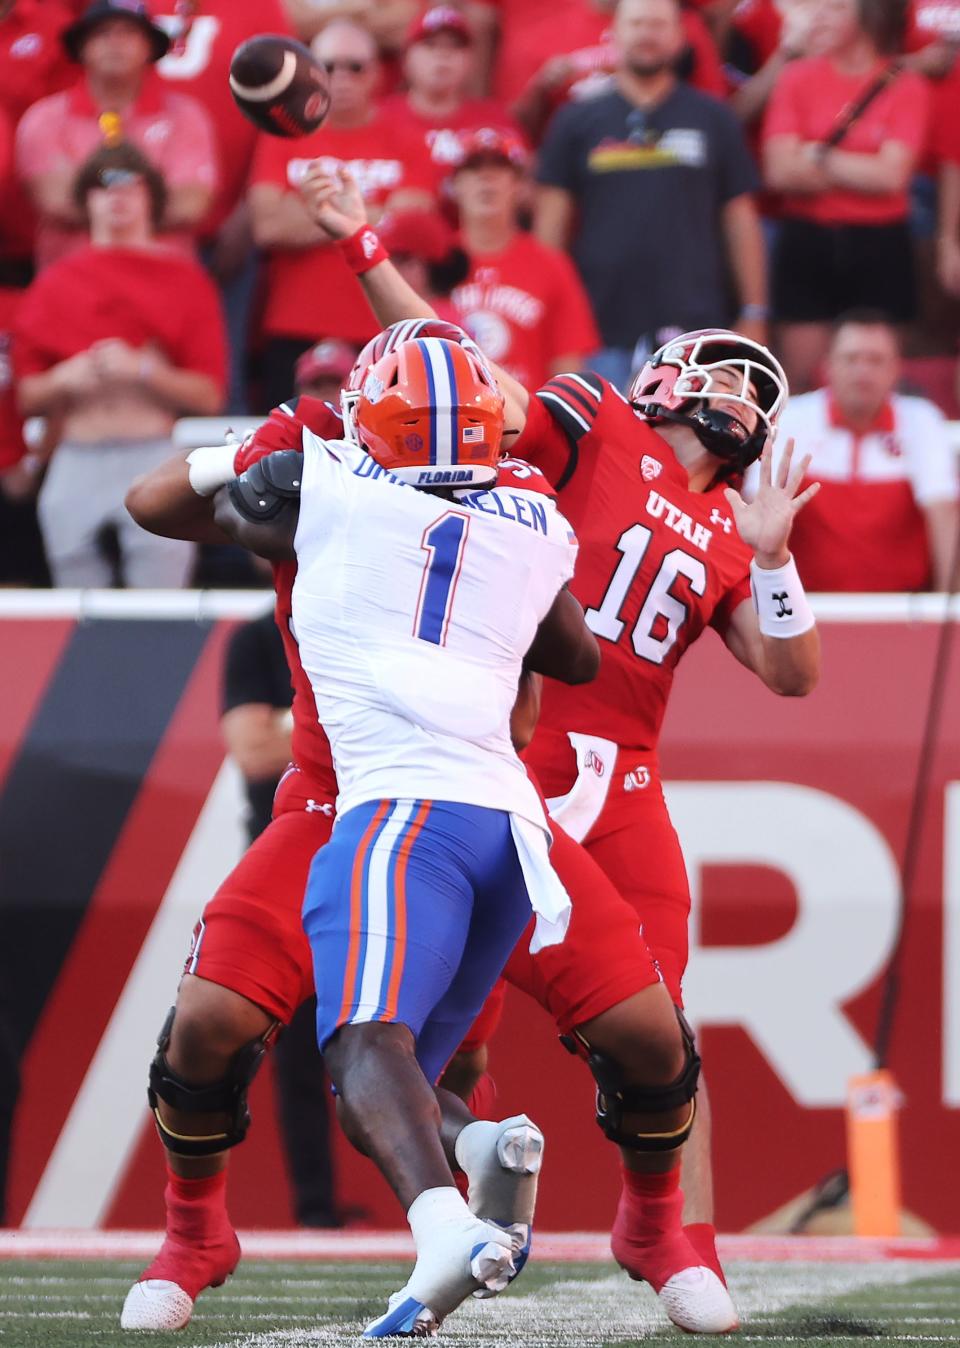 Utah Utes quarterback Bryson Barnes (16) makes a touchdown throw on the first offensive play against the Florida Gators in Salt Lake City on Thursday, Aug. 31, 2023 during the season opener. Utah won 24-11. | Jeffrey D. Allred, Deseret News